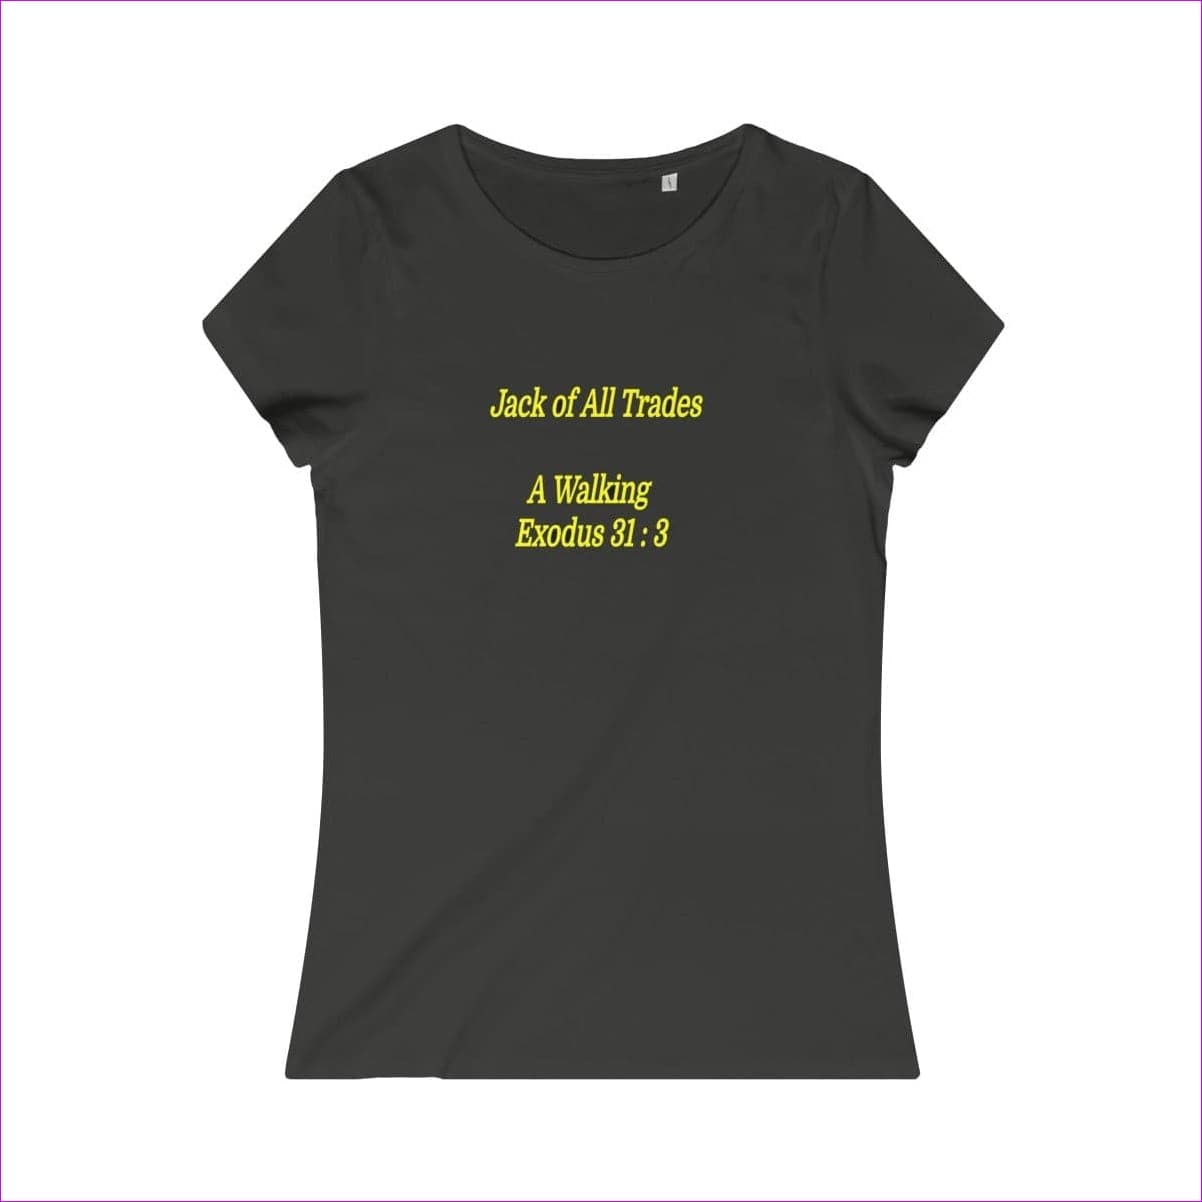 Anthracite Jack of All Trades Womens Organic Tee - women's T-Shirt at TFC&H Co.